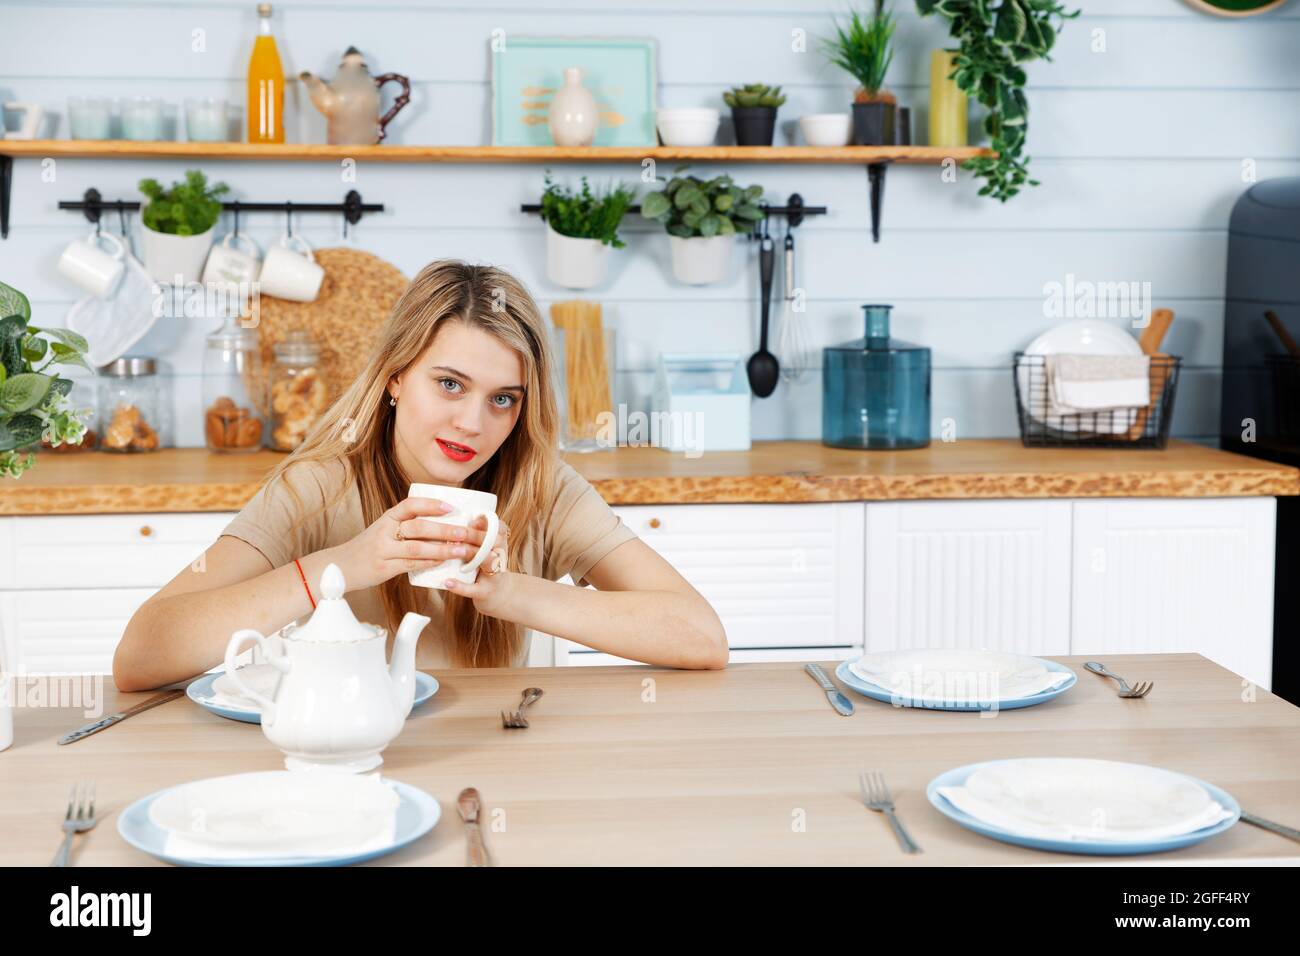 Young woman sitting at the kitchen table with a mug in her hands. Blurred background. Stock Photo